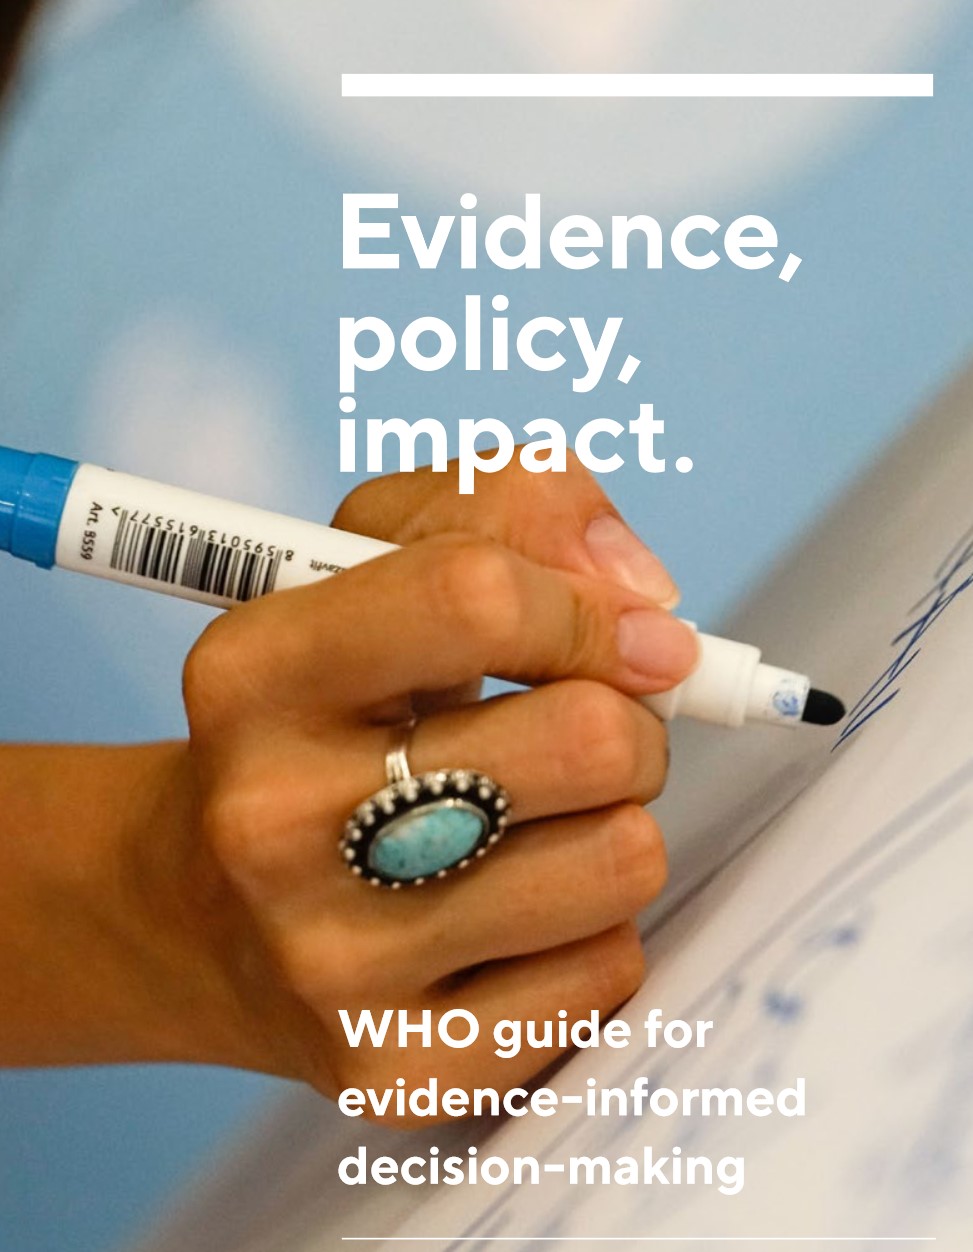 Evidence, policy, impact: WHO guide for evidence-informed decision-making